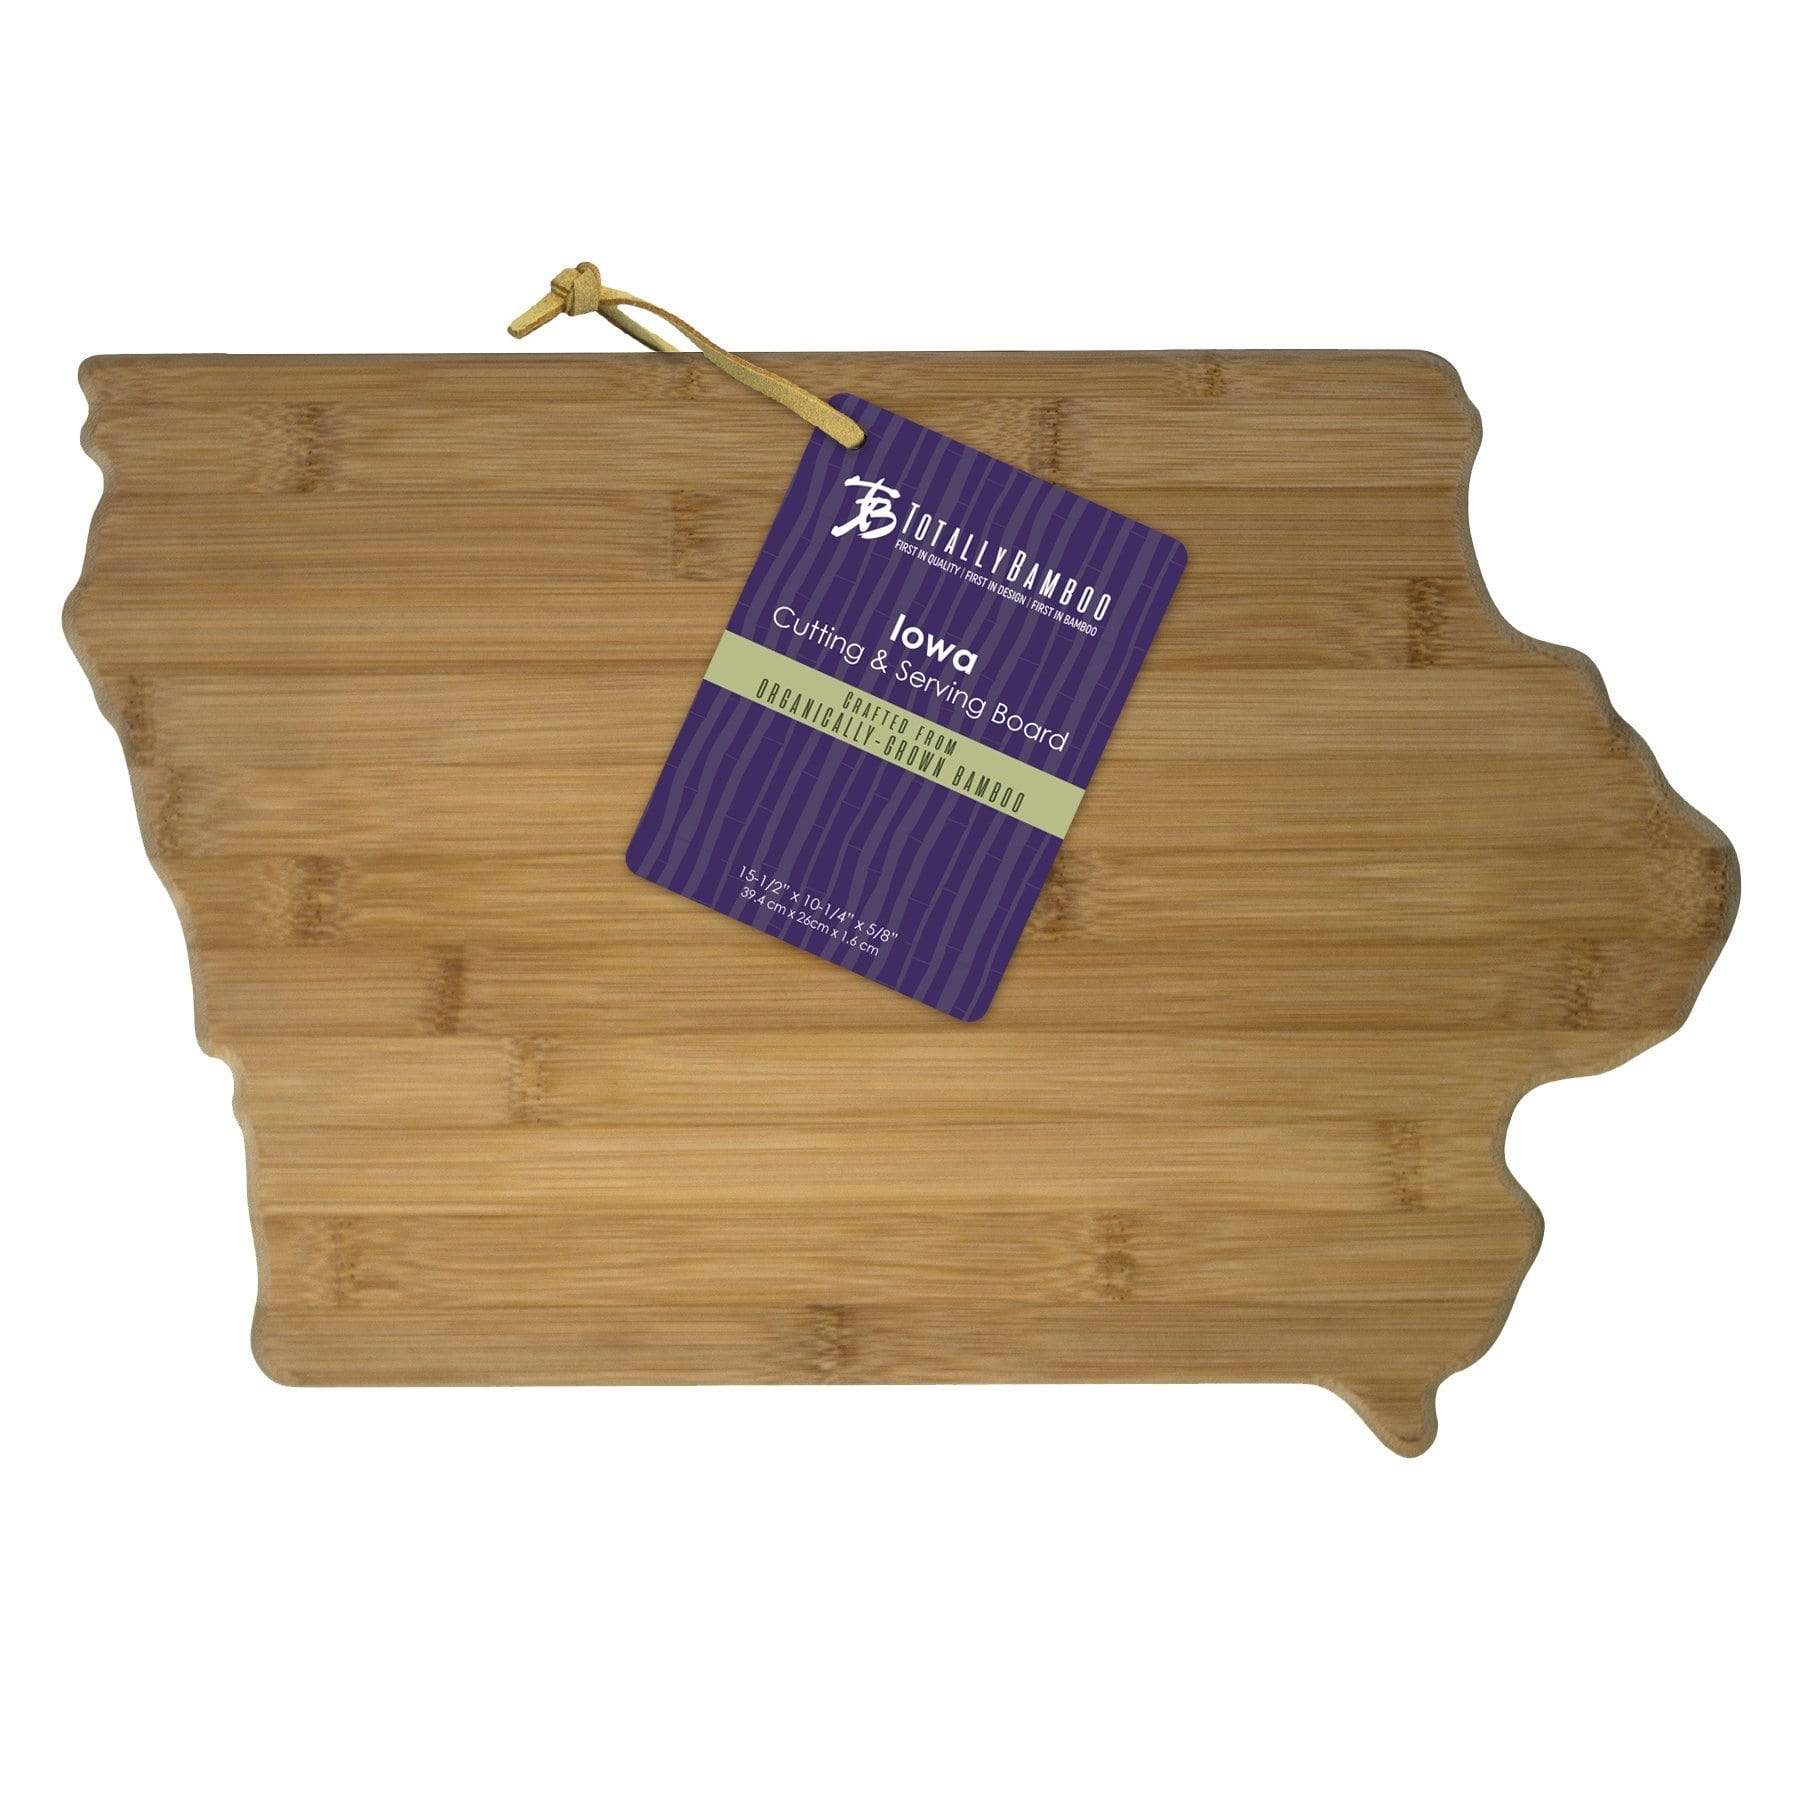 Totally Bamboo Iowa State Shaped Bamboo Serving and Cutting Board